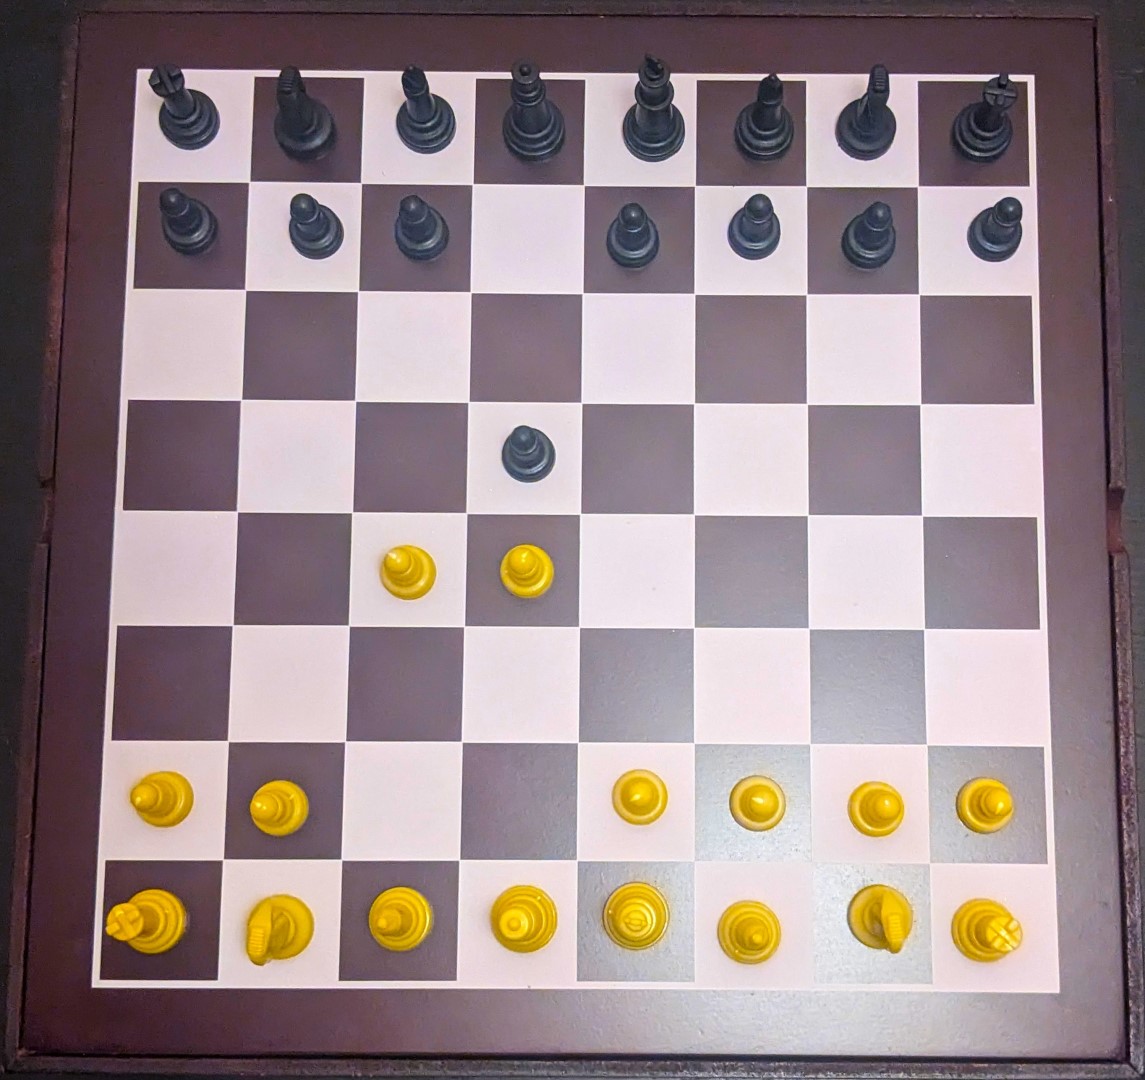 The Queen's Gambit, one of the best chess openings for beginners